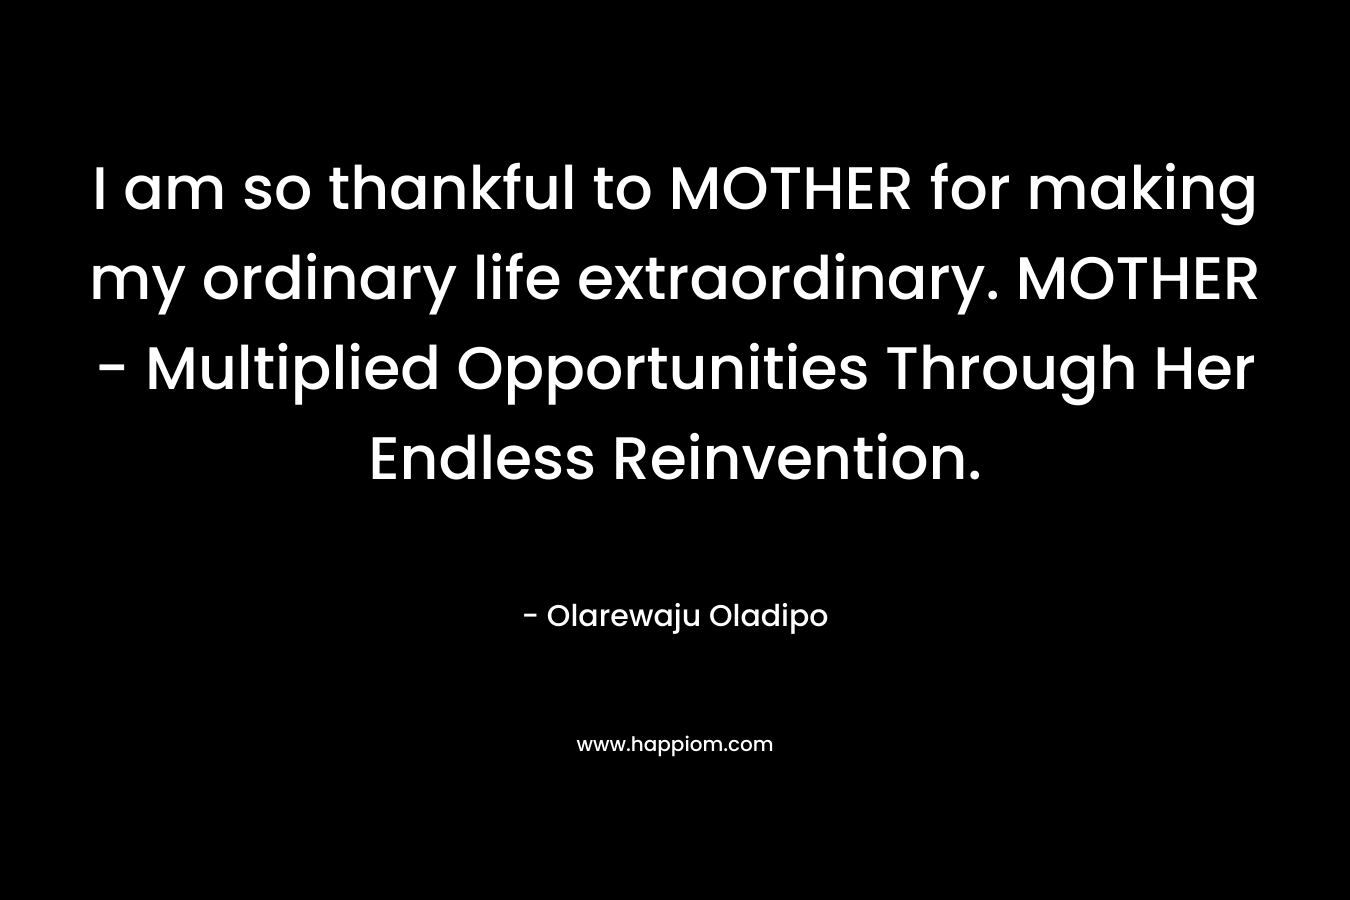 I am so thankful to MOTHER for making my ordinary life extraordinary. MOTHER – Multiplied Opportunities Through Her Endless Reinvention. – Olarewaju Oladipo